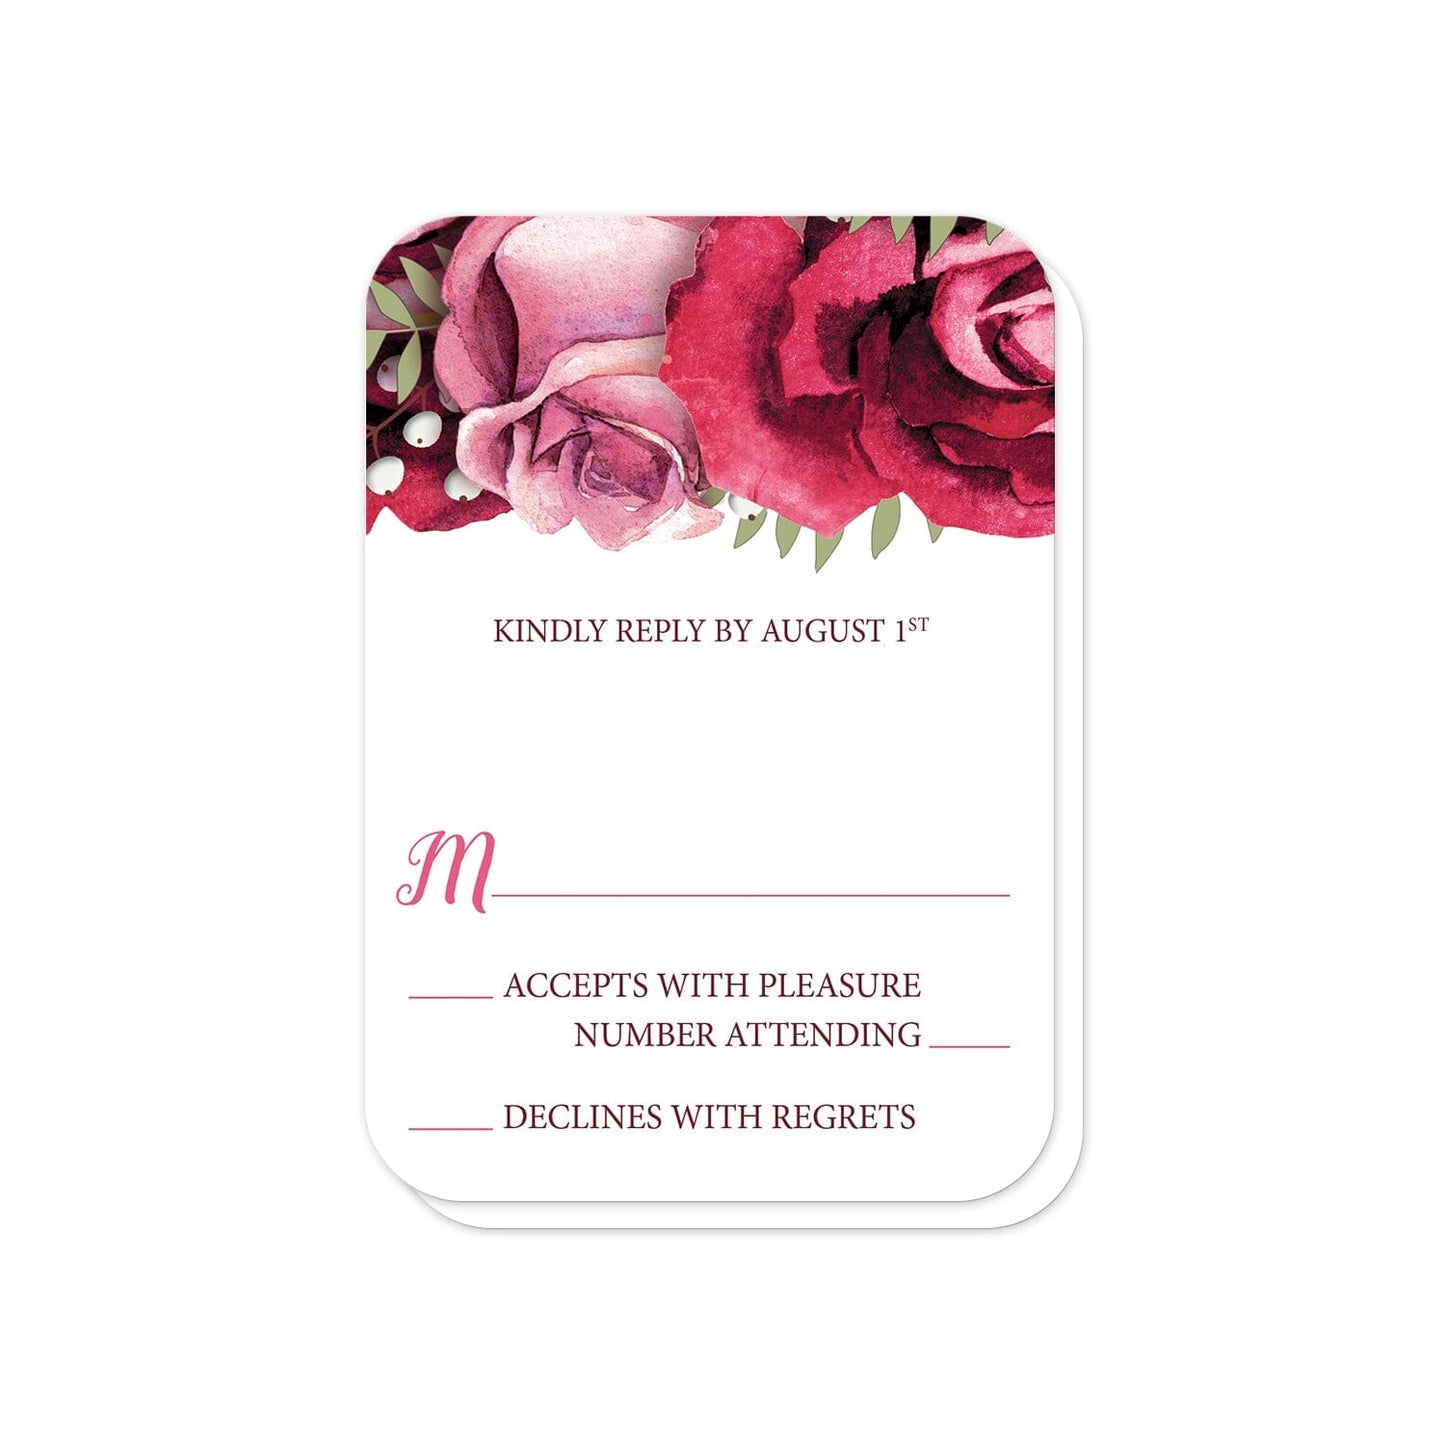 Rustic Burgundy Pink Rose White RSVP Cards (with rounded corners) at Artistically Invited.